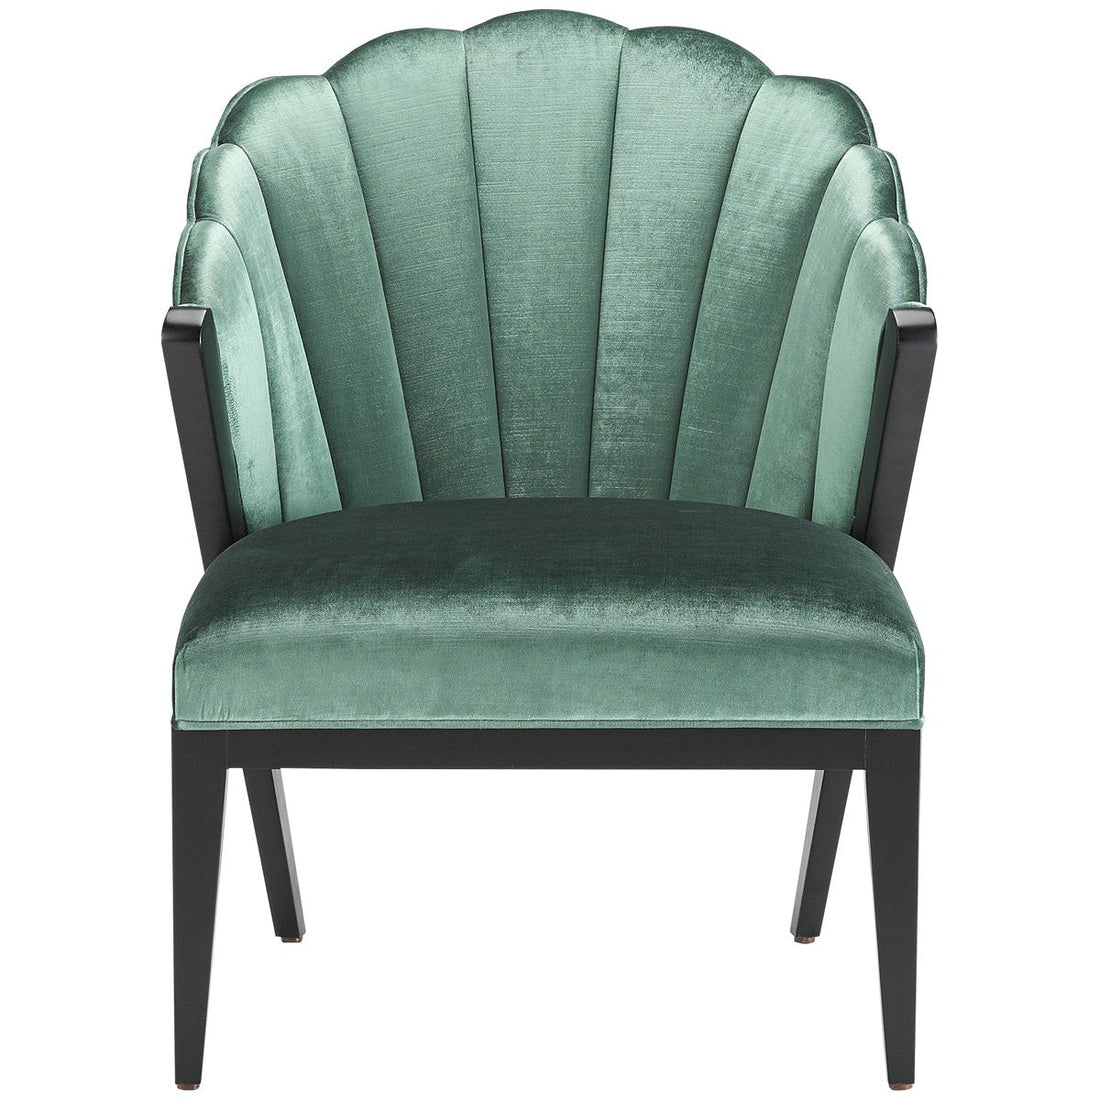 Currey and Company Janelle Chair